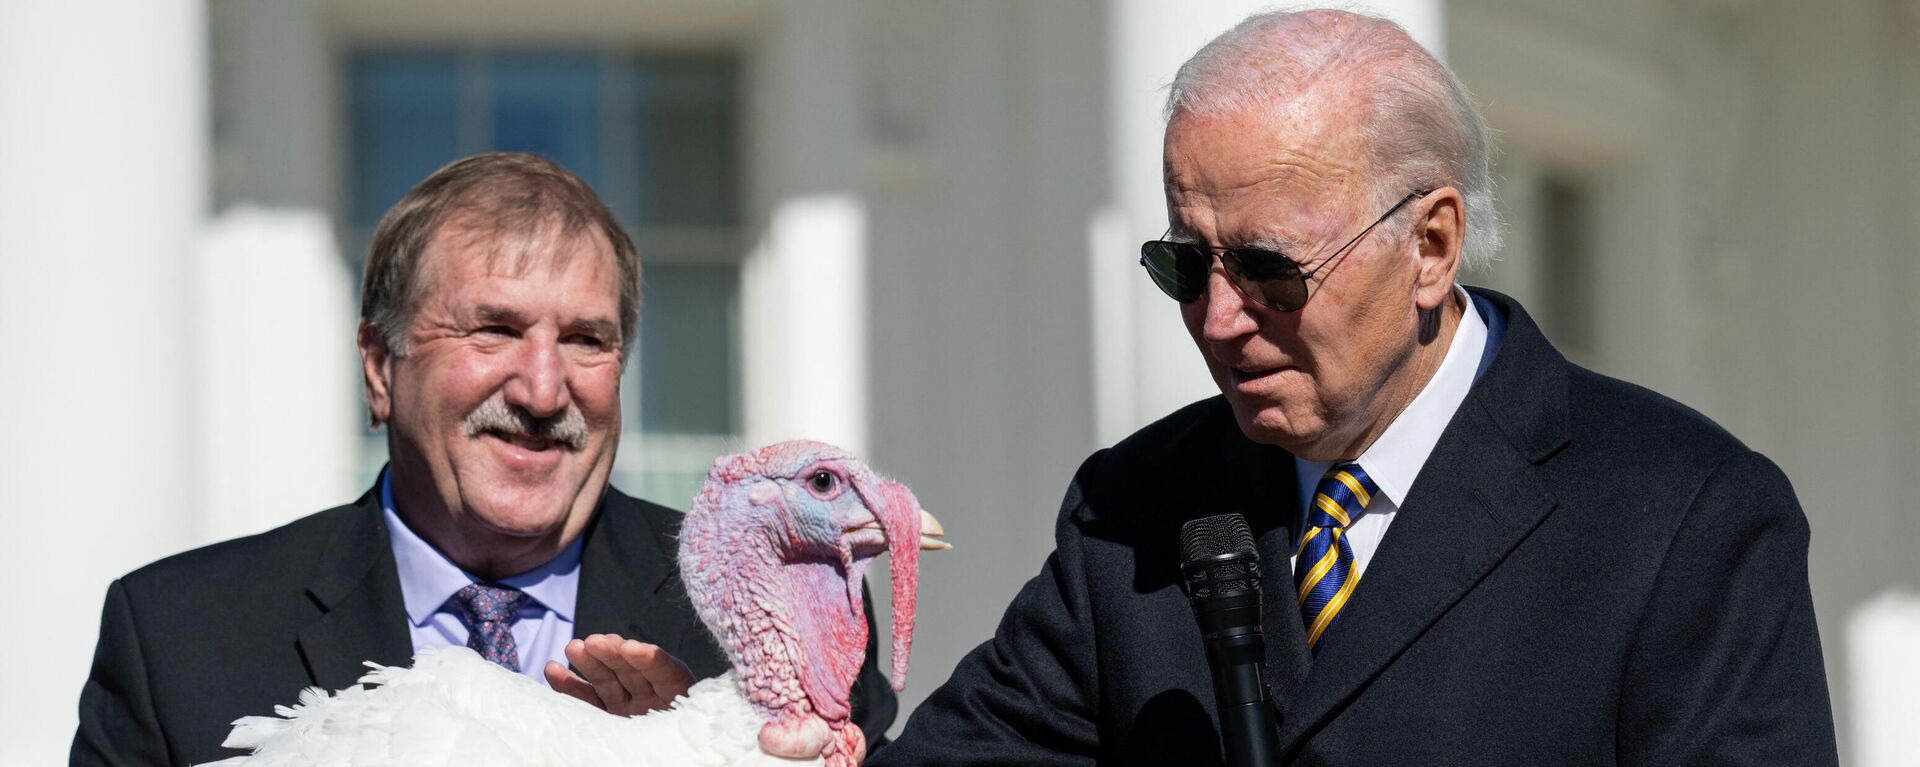 US President Joe Biden pardons Chocolate, the National Thanksgiving Turkey, as he is joined by the National Turkey Federation Chairman Ronnie Parker (L) on the South Lawn of the White House in Washington, DC on November 21, 2022.  - Sputnik International, 1920, 24.11.2022